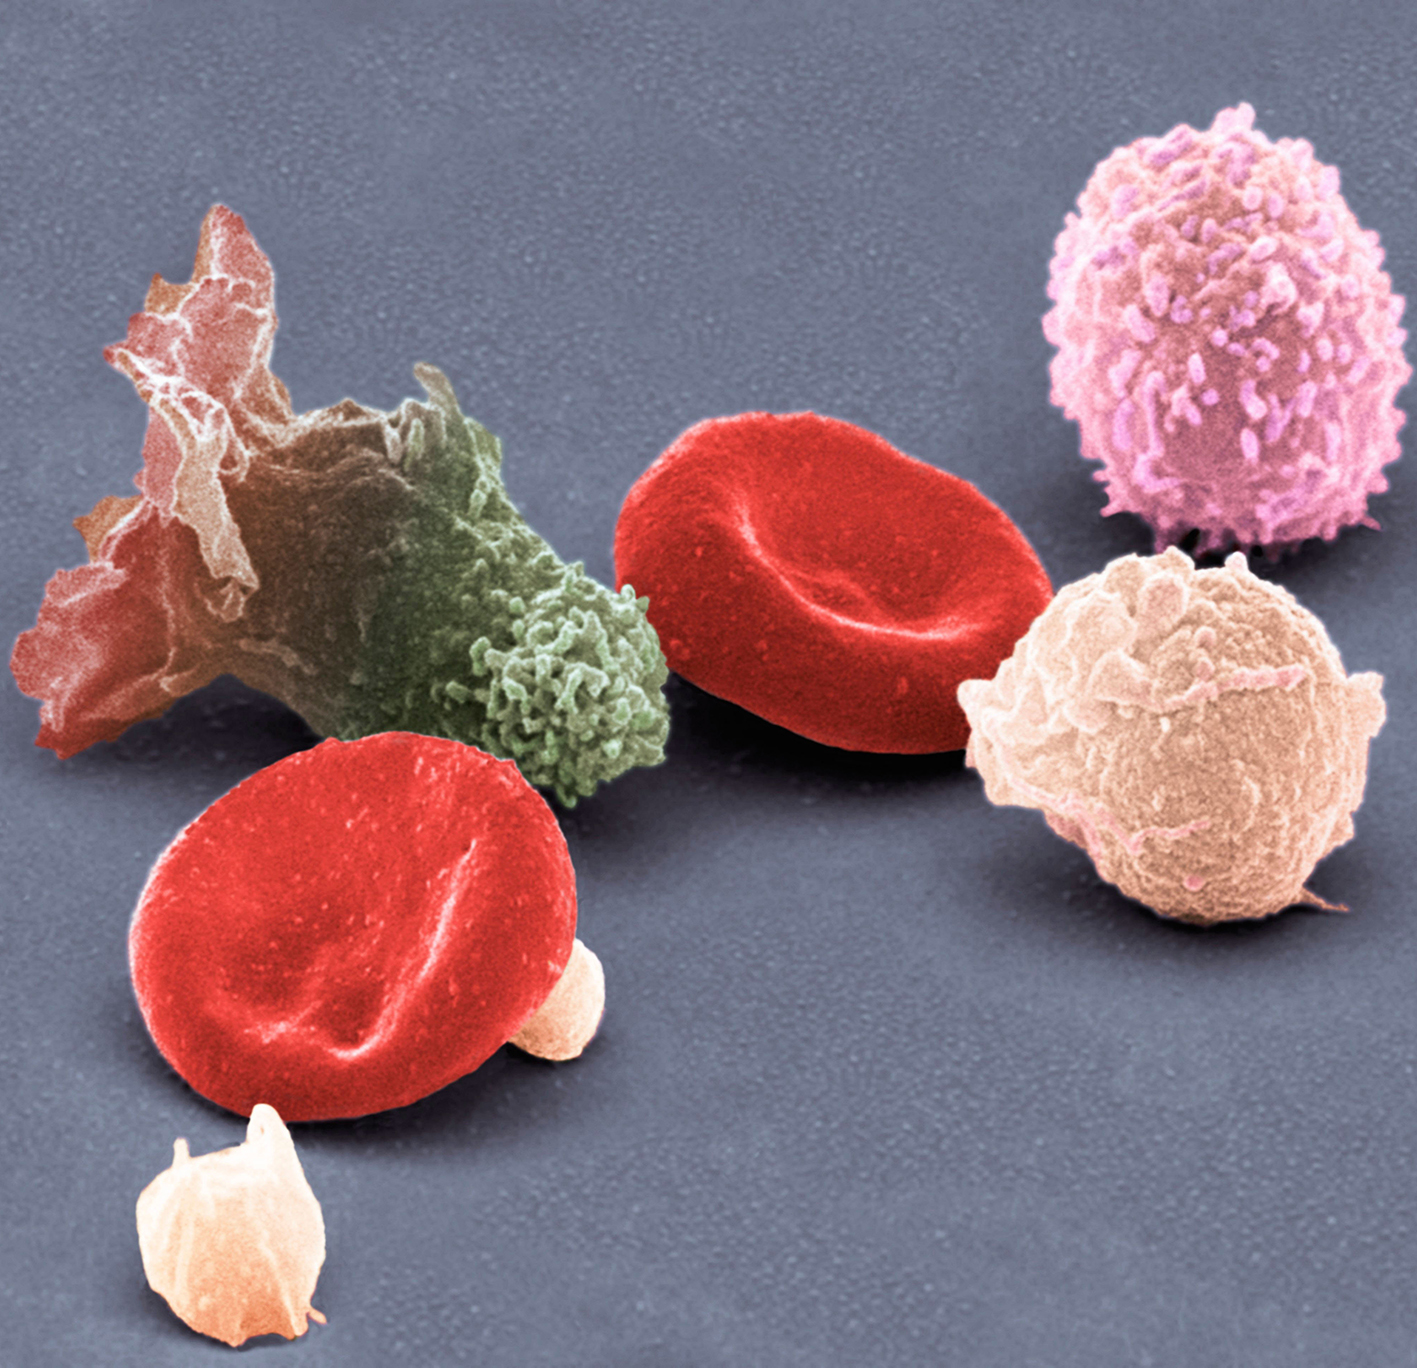 Magnification view of human blood cells under a Color scanning electron micrograph